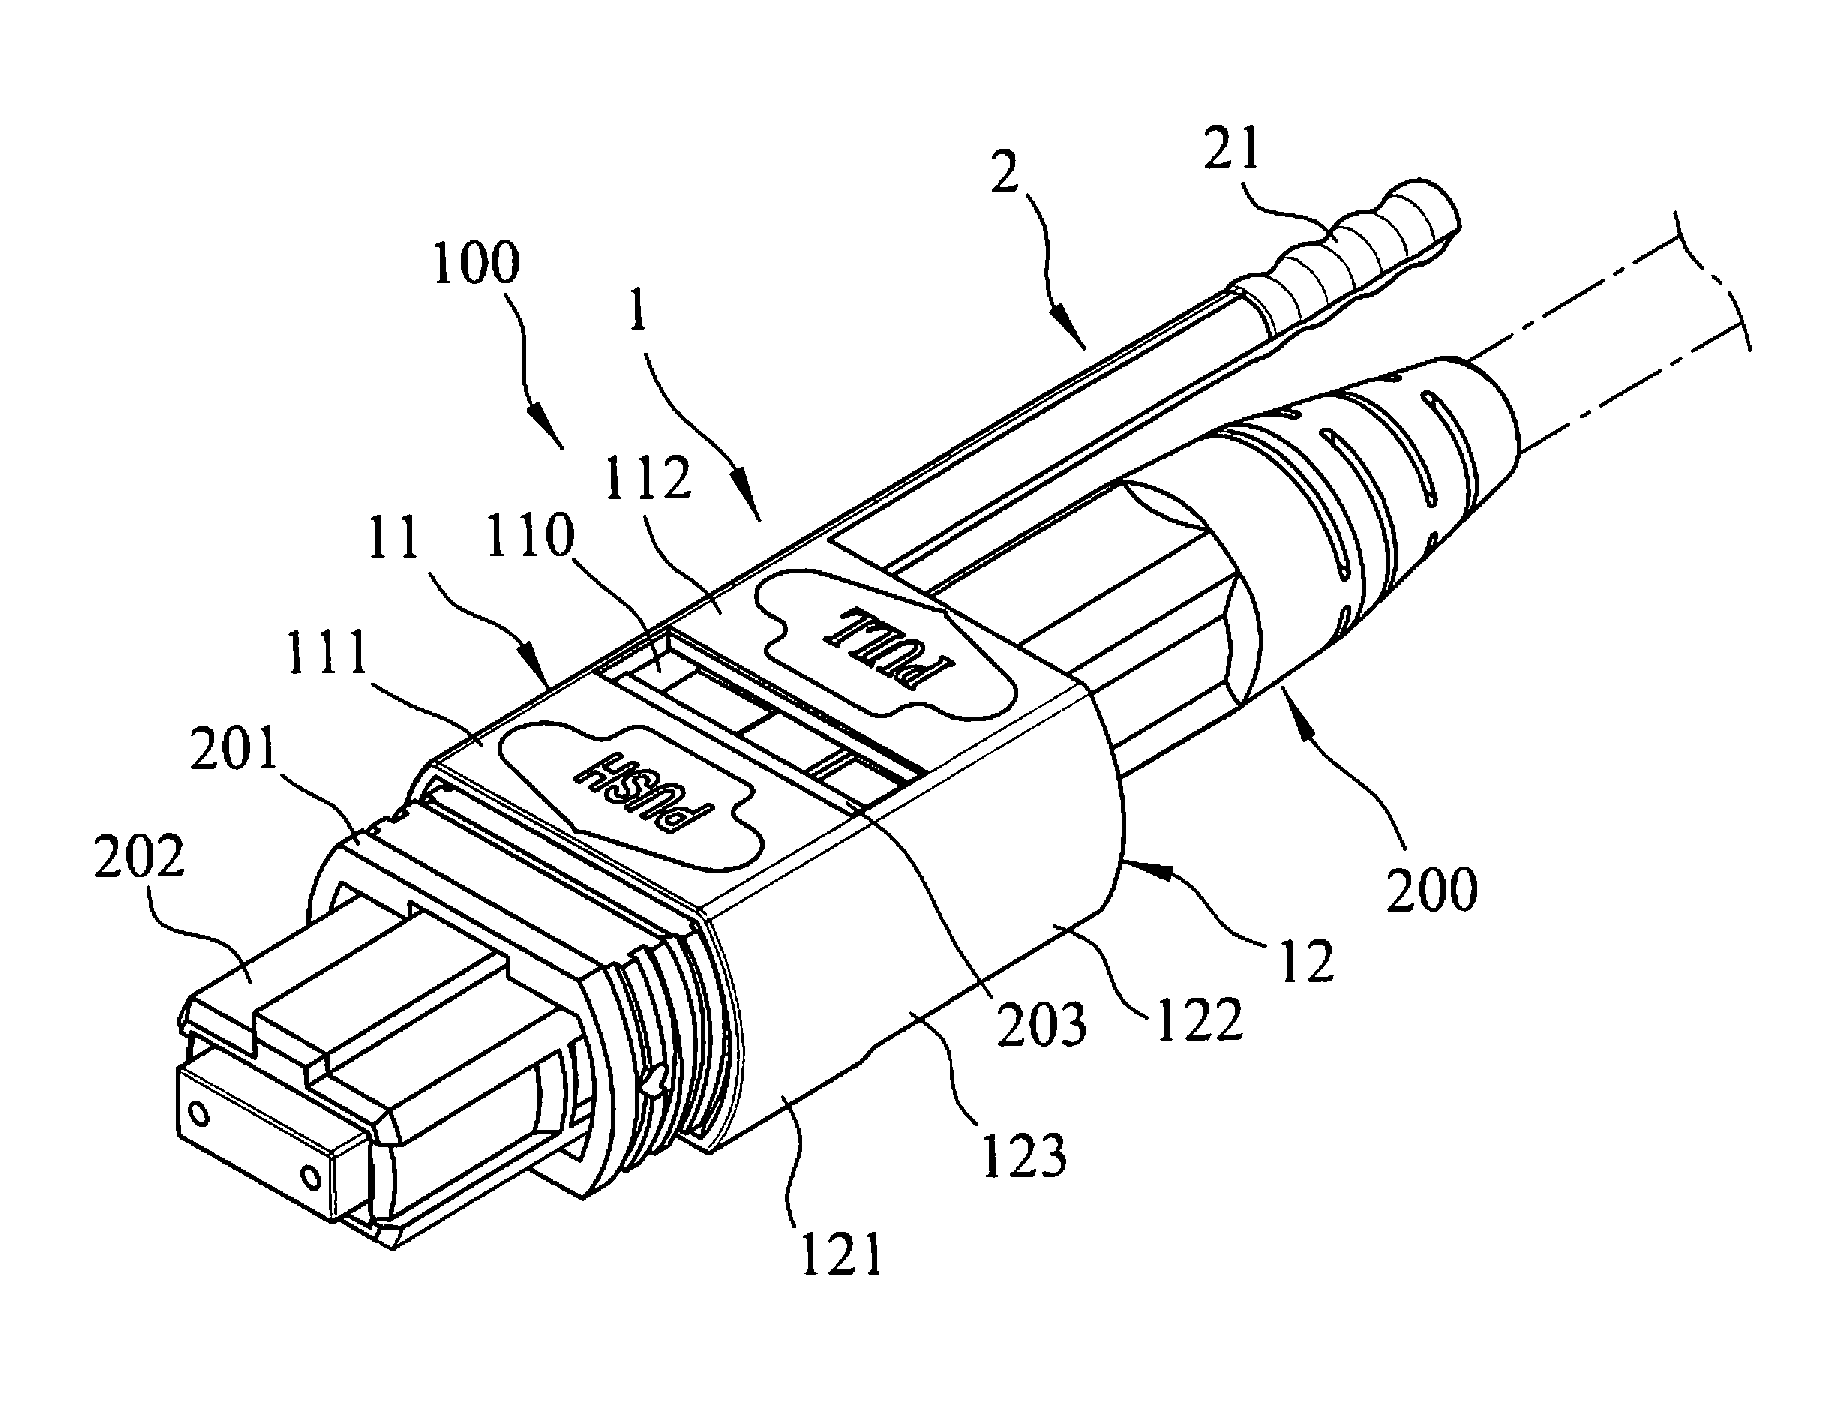 Clip device for facilitating insertion and removal of a push-pull fiber optic connector